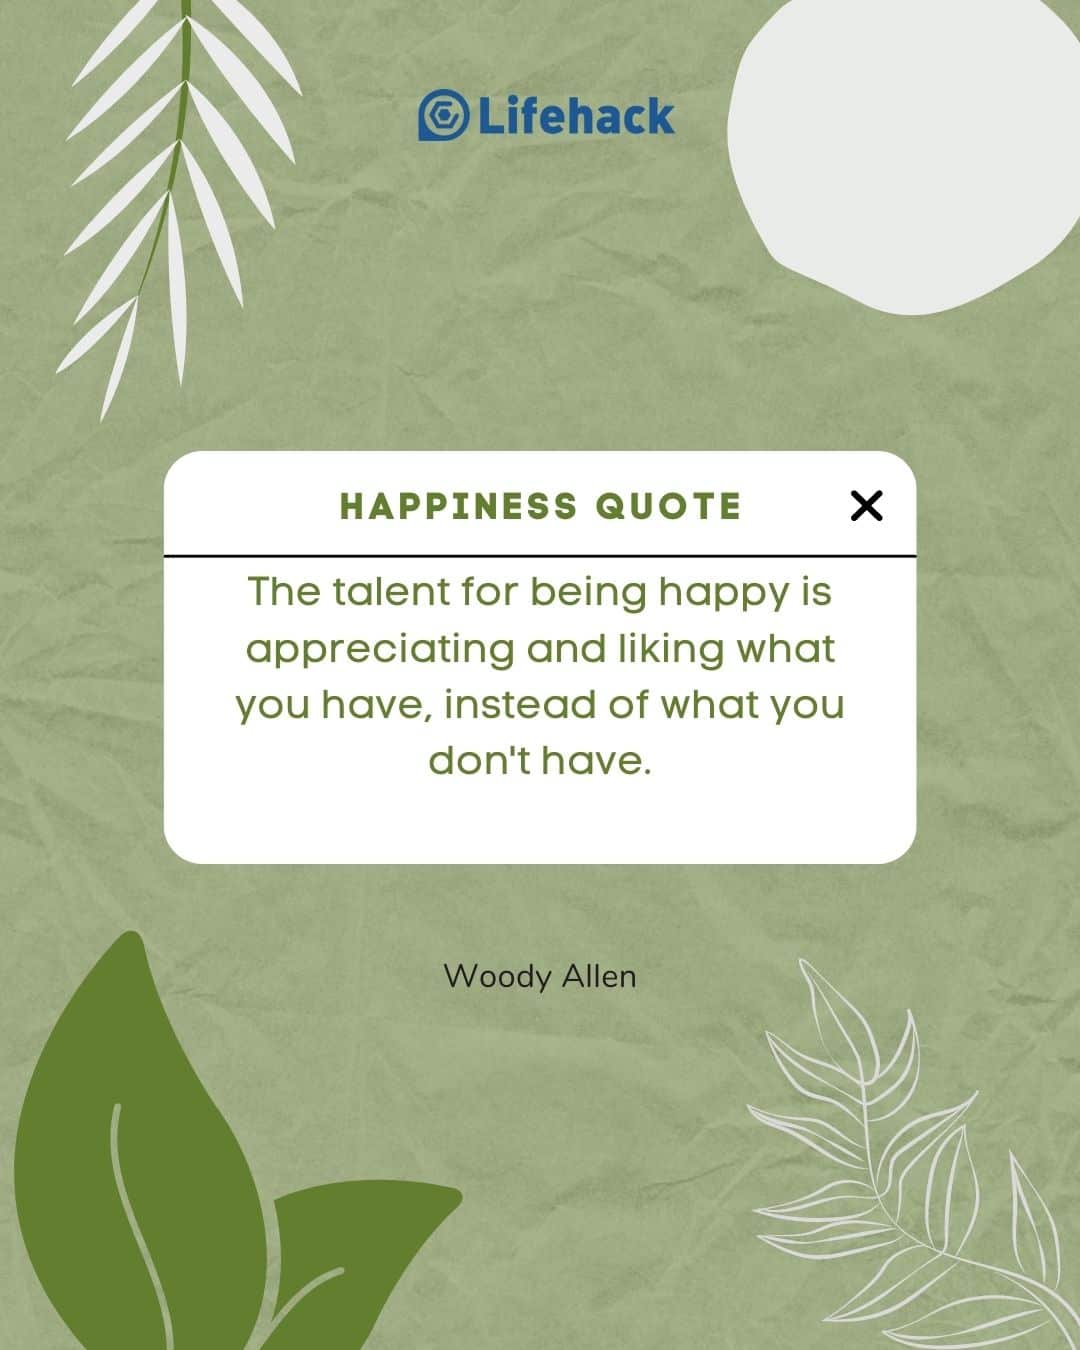 21 Happy Quotes About the Meaning of True Happiness